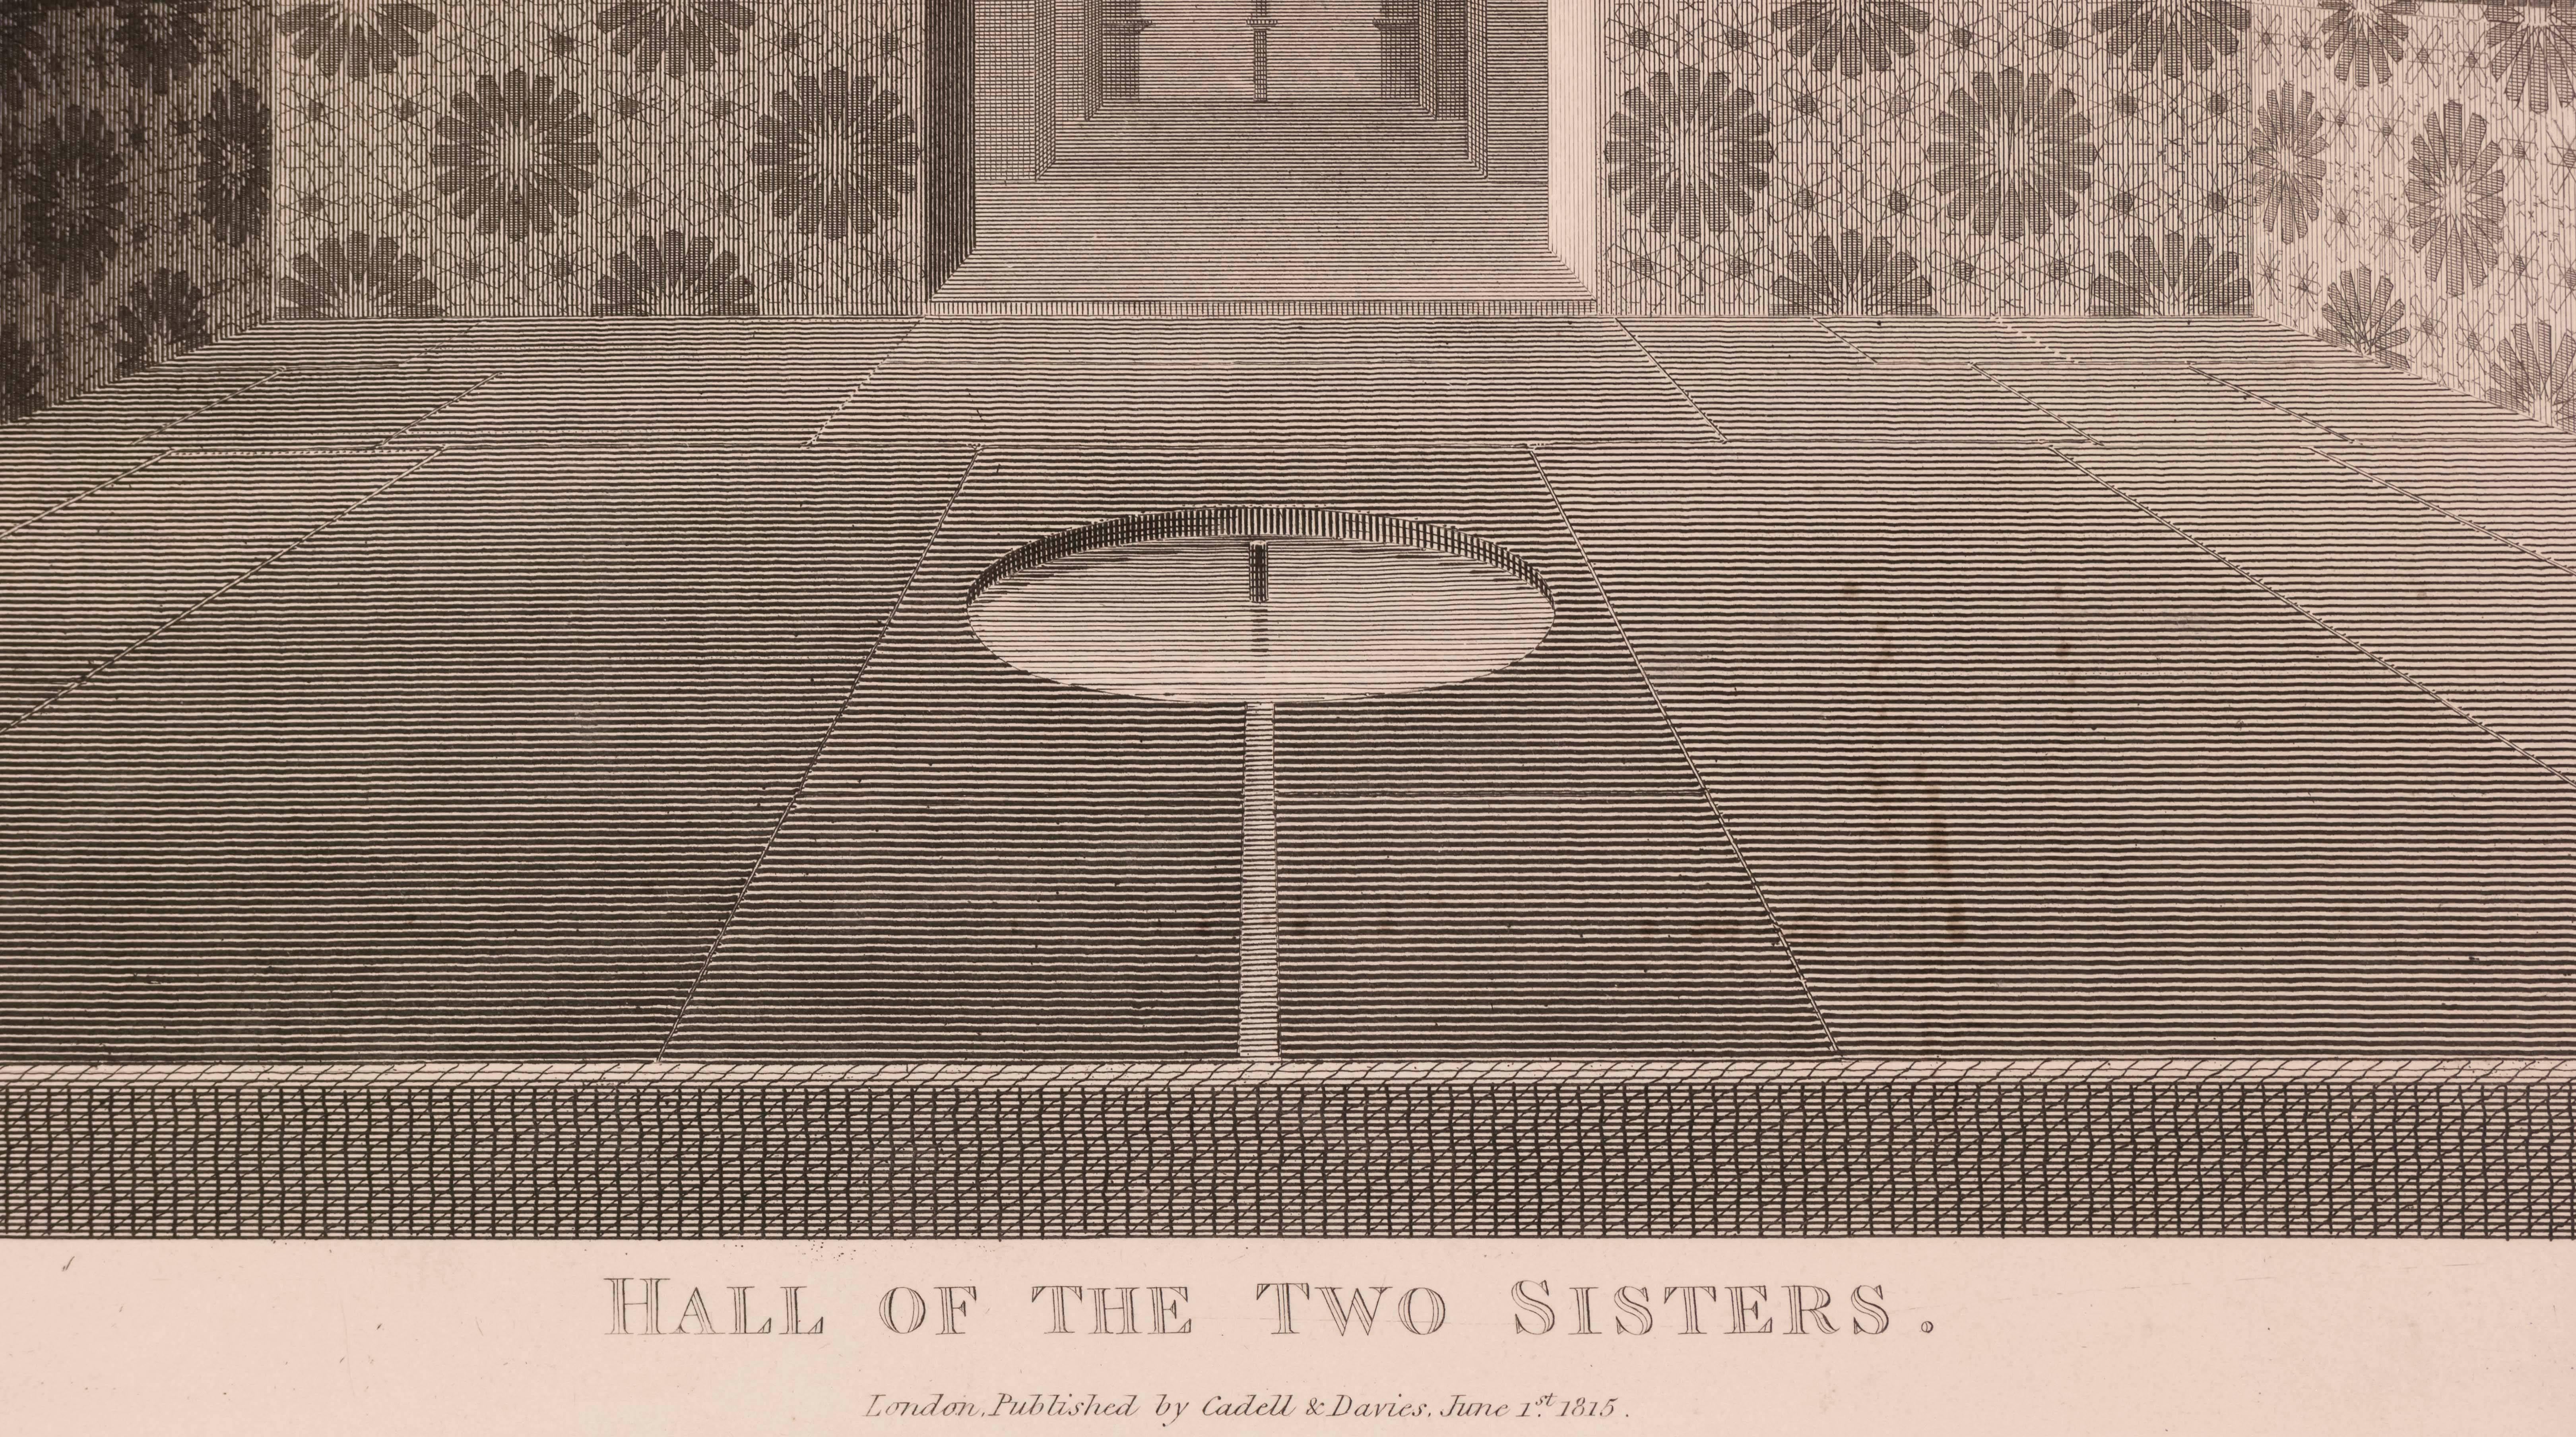 Hall of the Two Sisters - Print by J. C. Murphy